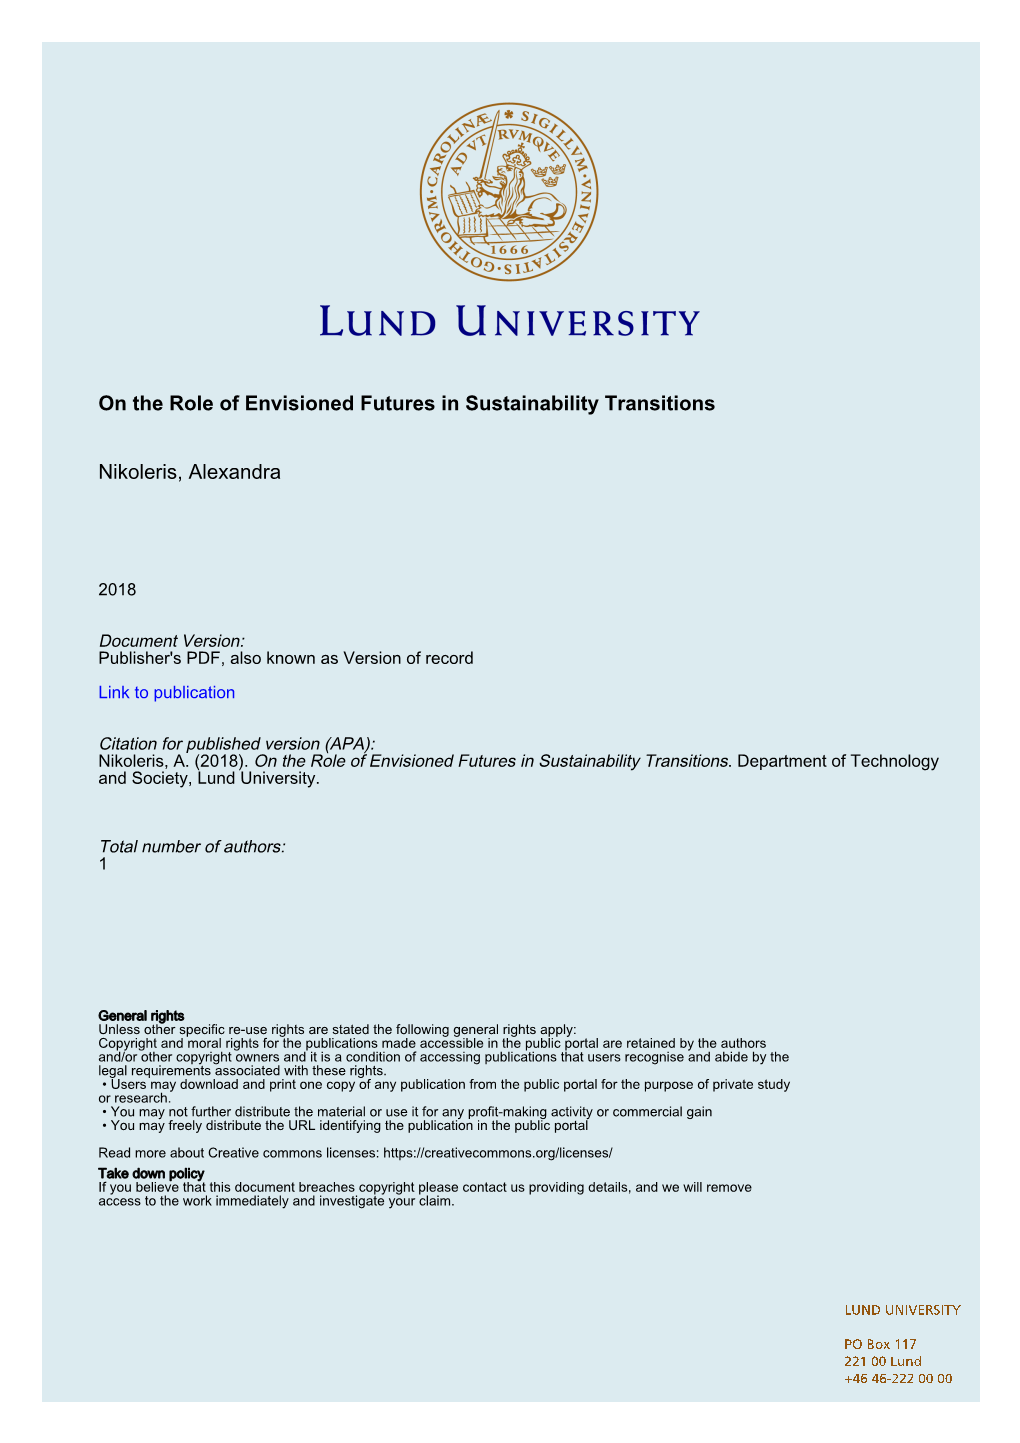 On the Role of Envisioned Futures in Sustainability Transitions Nikoleris